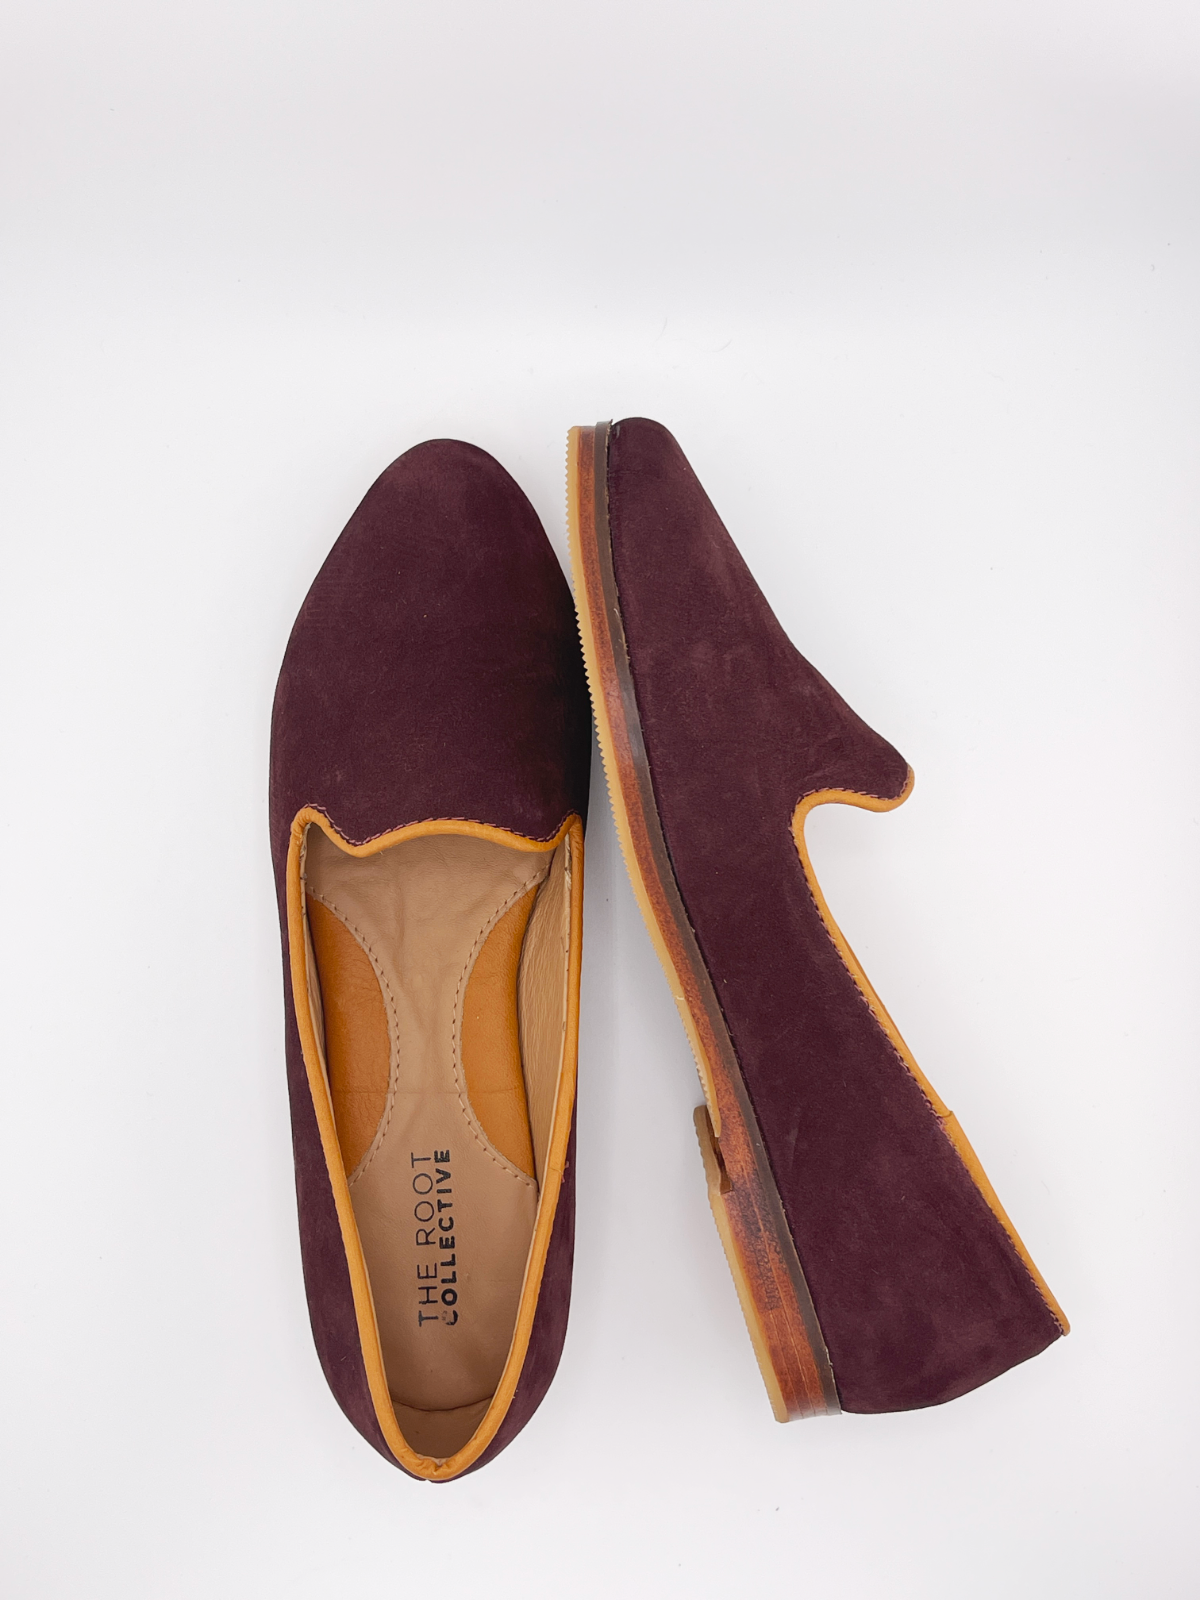 Millie Flat in Wine Nubuck with Camel Leather (PREORDER)